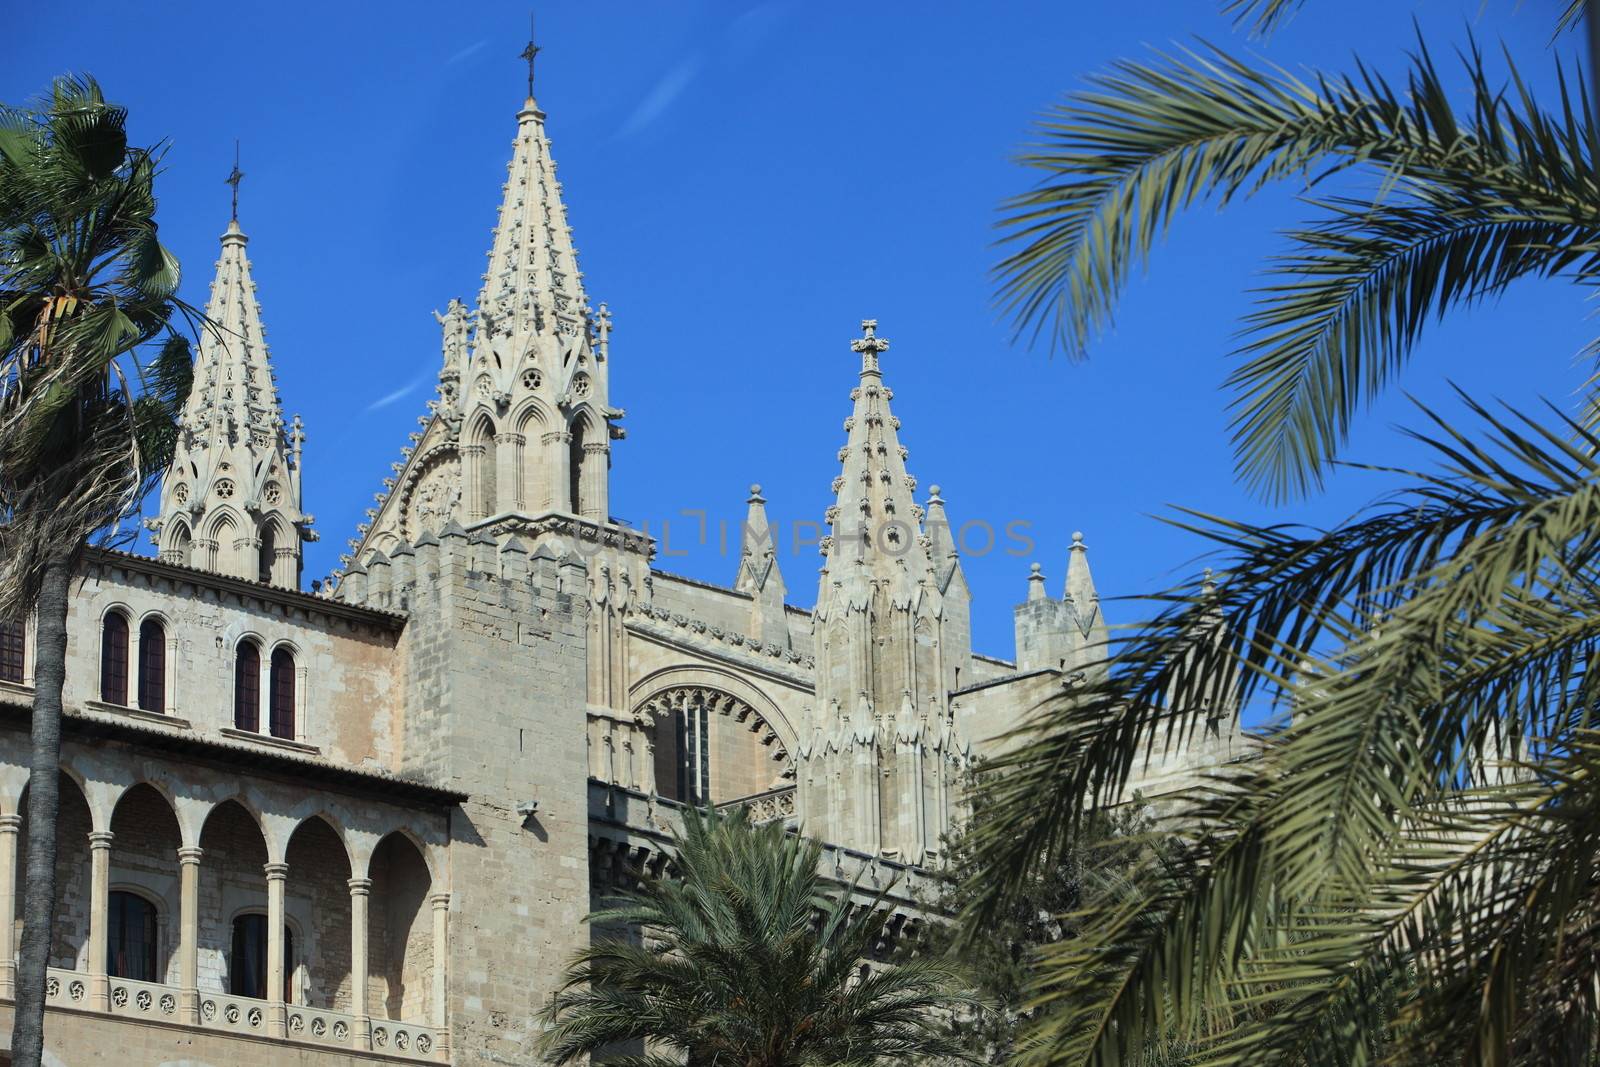 View between tropical palm trees of the exterior of the landmark building La Seu Cathedral in Mallorca, Balearic Islands, Spain